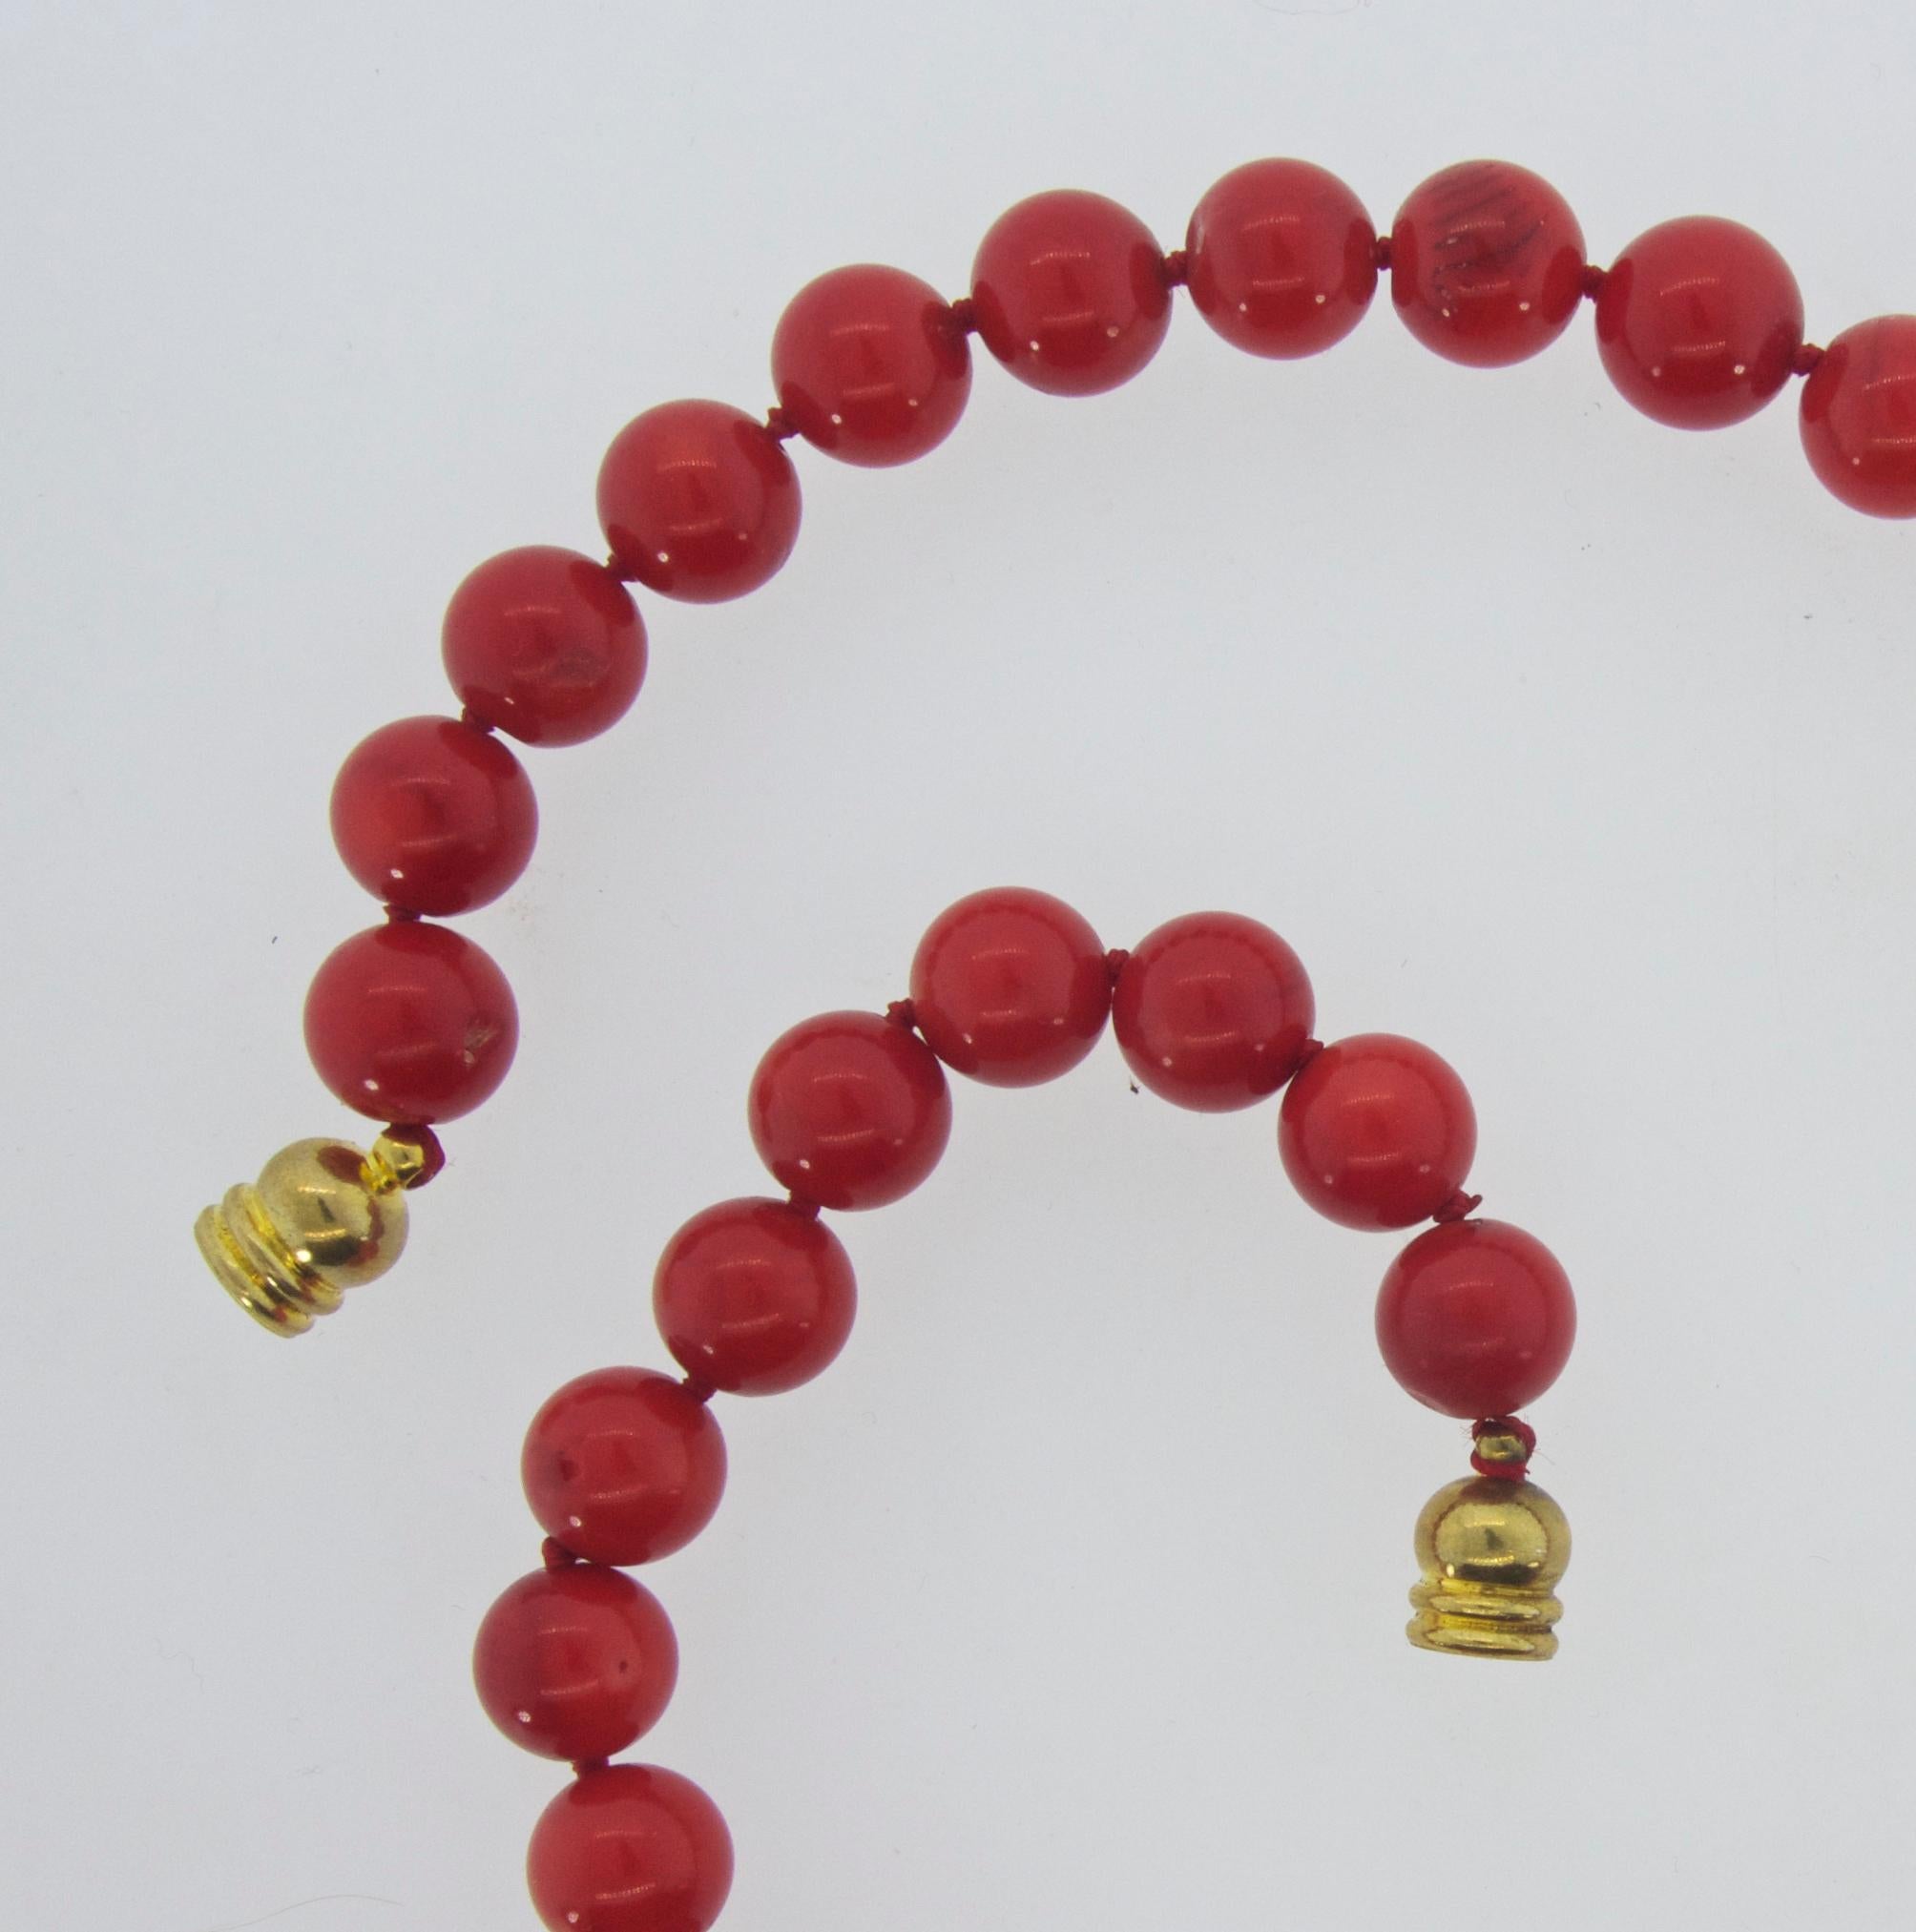 Red coral (referred to as Oxblood) bead necklace with 41 round 10 mm coral beads knotted and strung on red silk.  This strand is 18 inches long.  The coral is well matched with slight graining apparent and very slight color striations and very